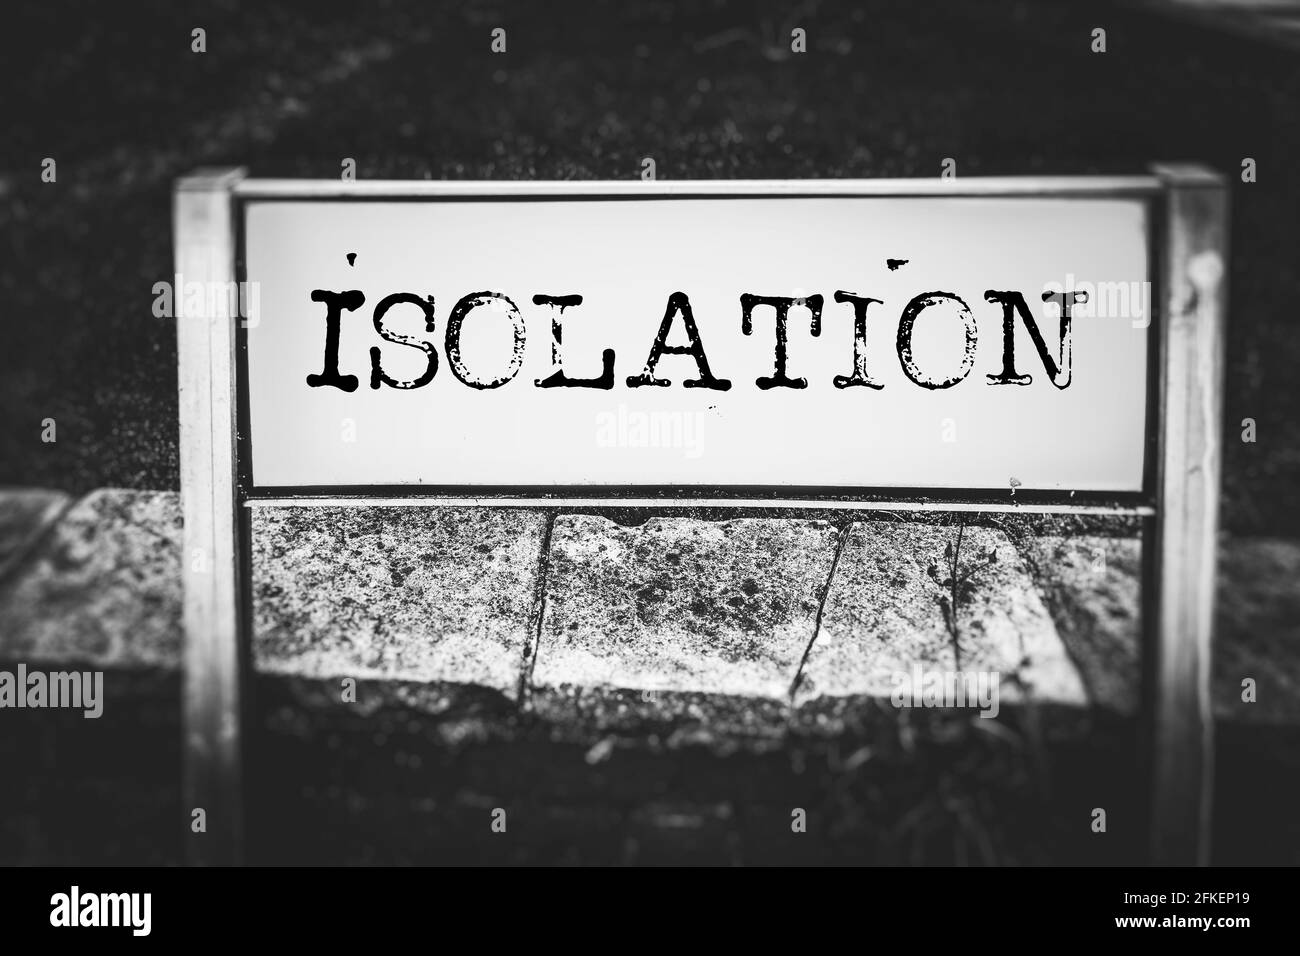 Isolation displayed on a street sign Stock Photo